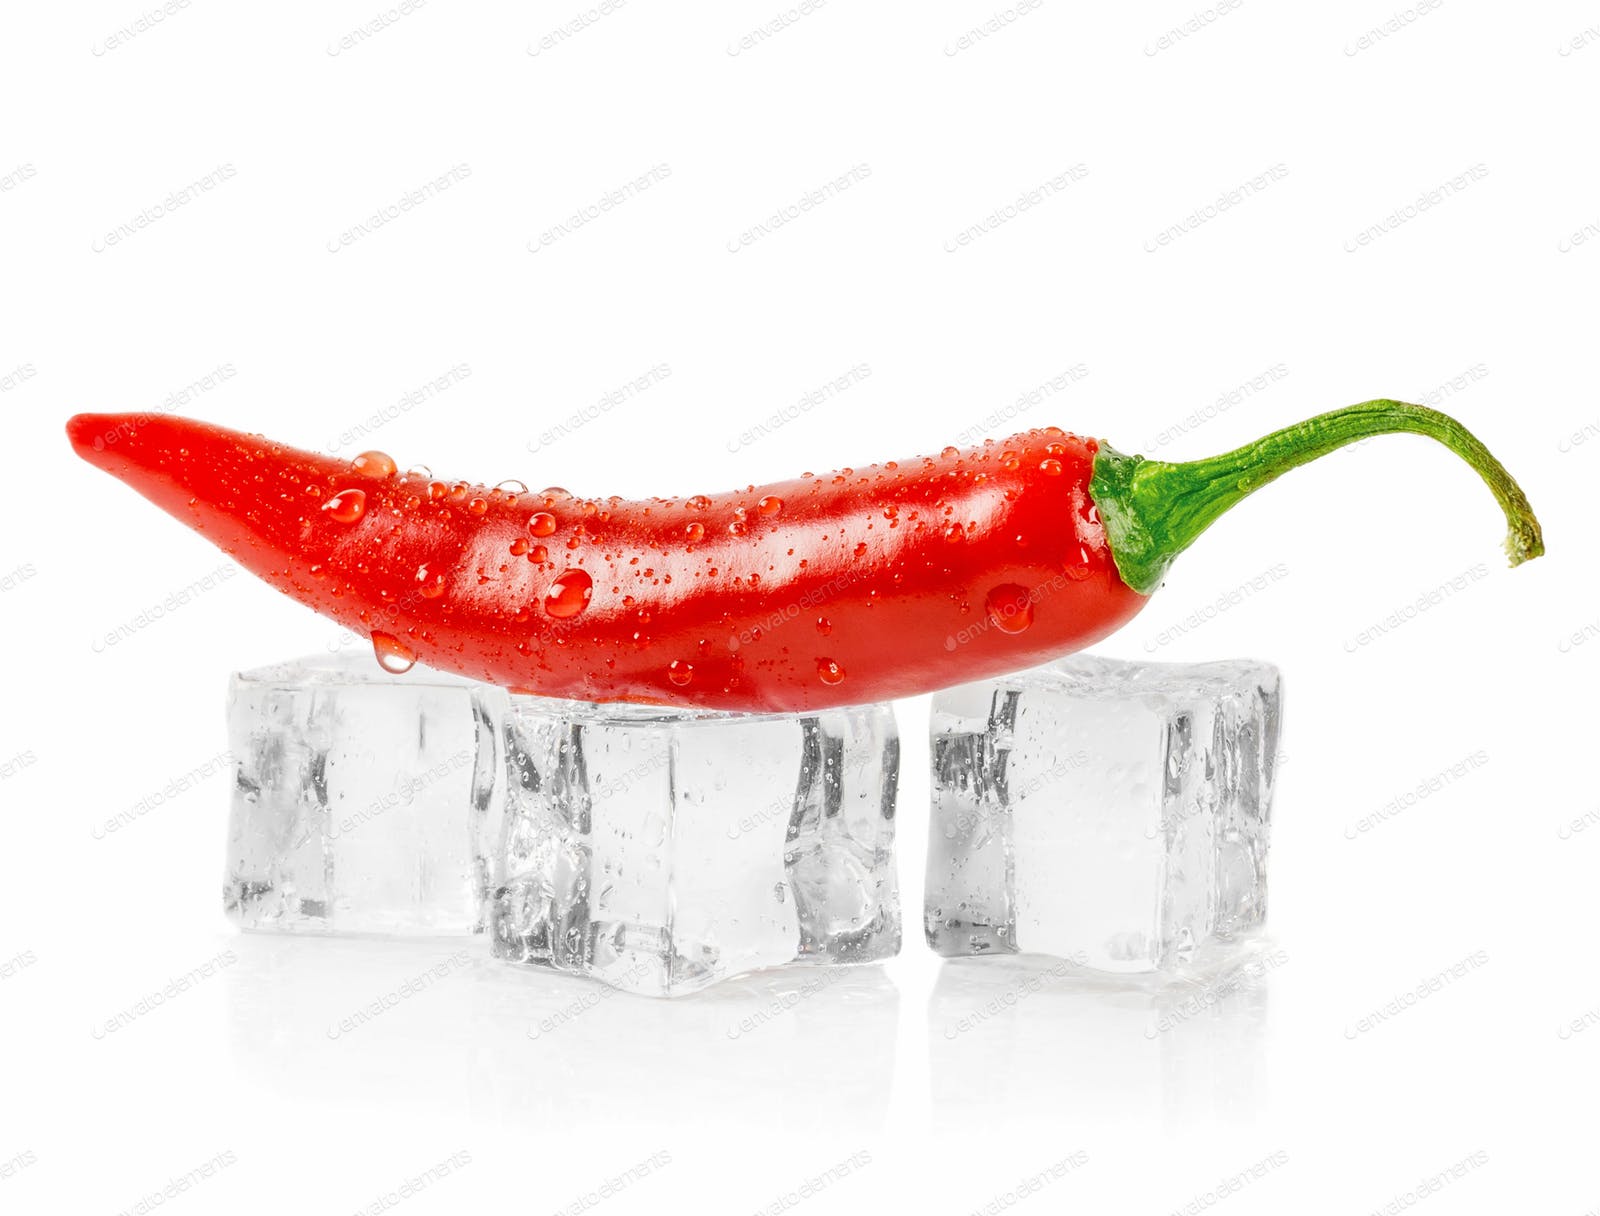 A red chili pepper lying on ice cubes photo by gcpics on Envato Elements